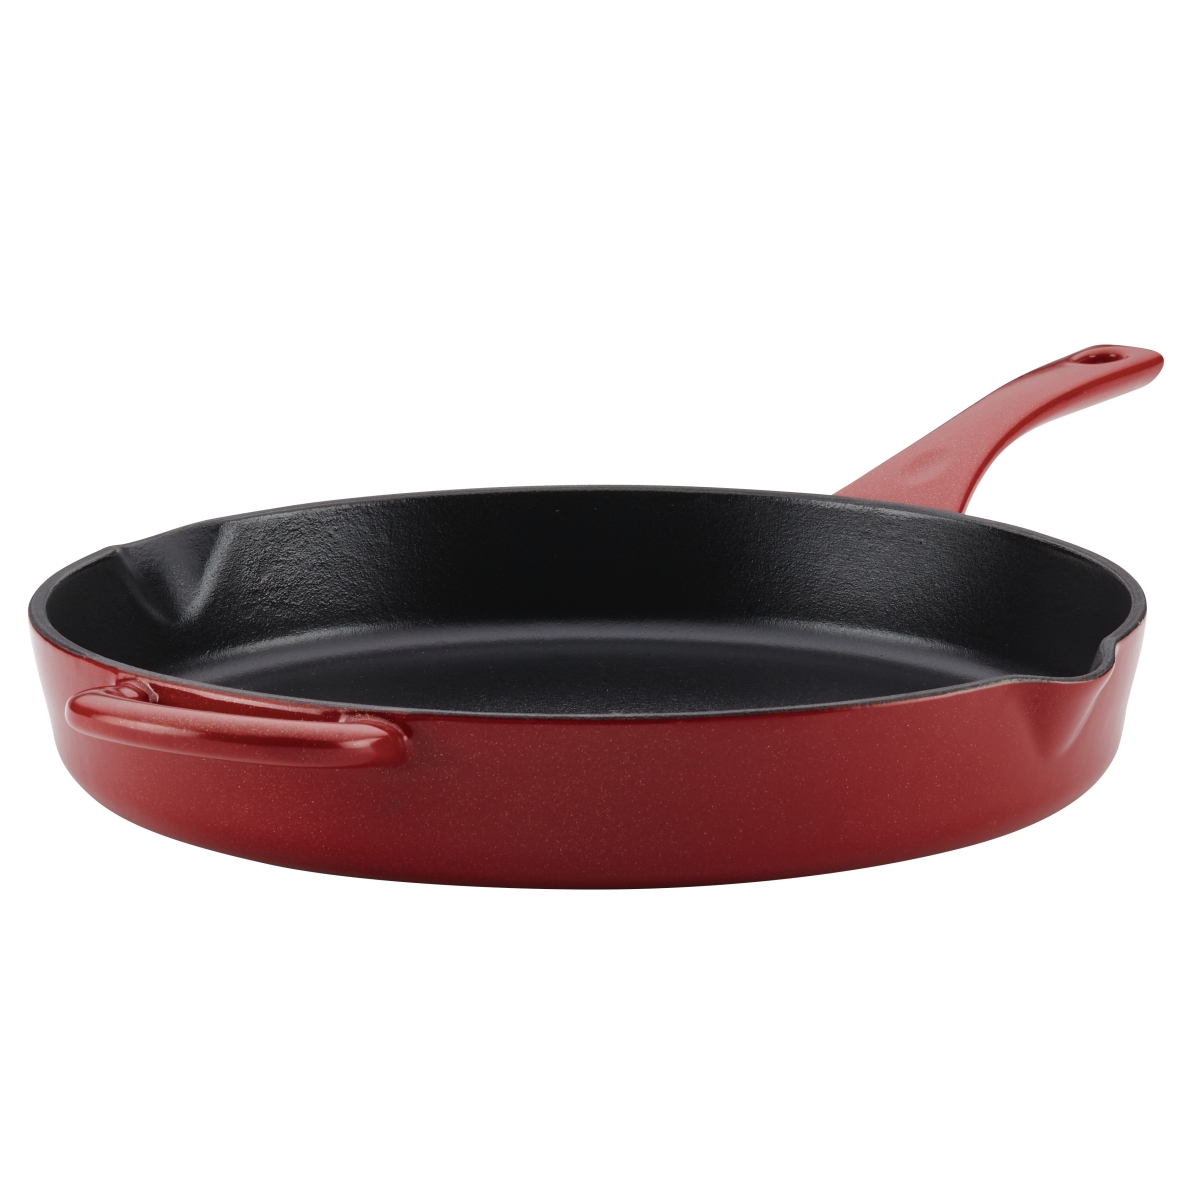 46961 Cast Iron Enamel Skillet With Pour Spouts, 12 In. - Sienna Red